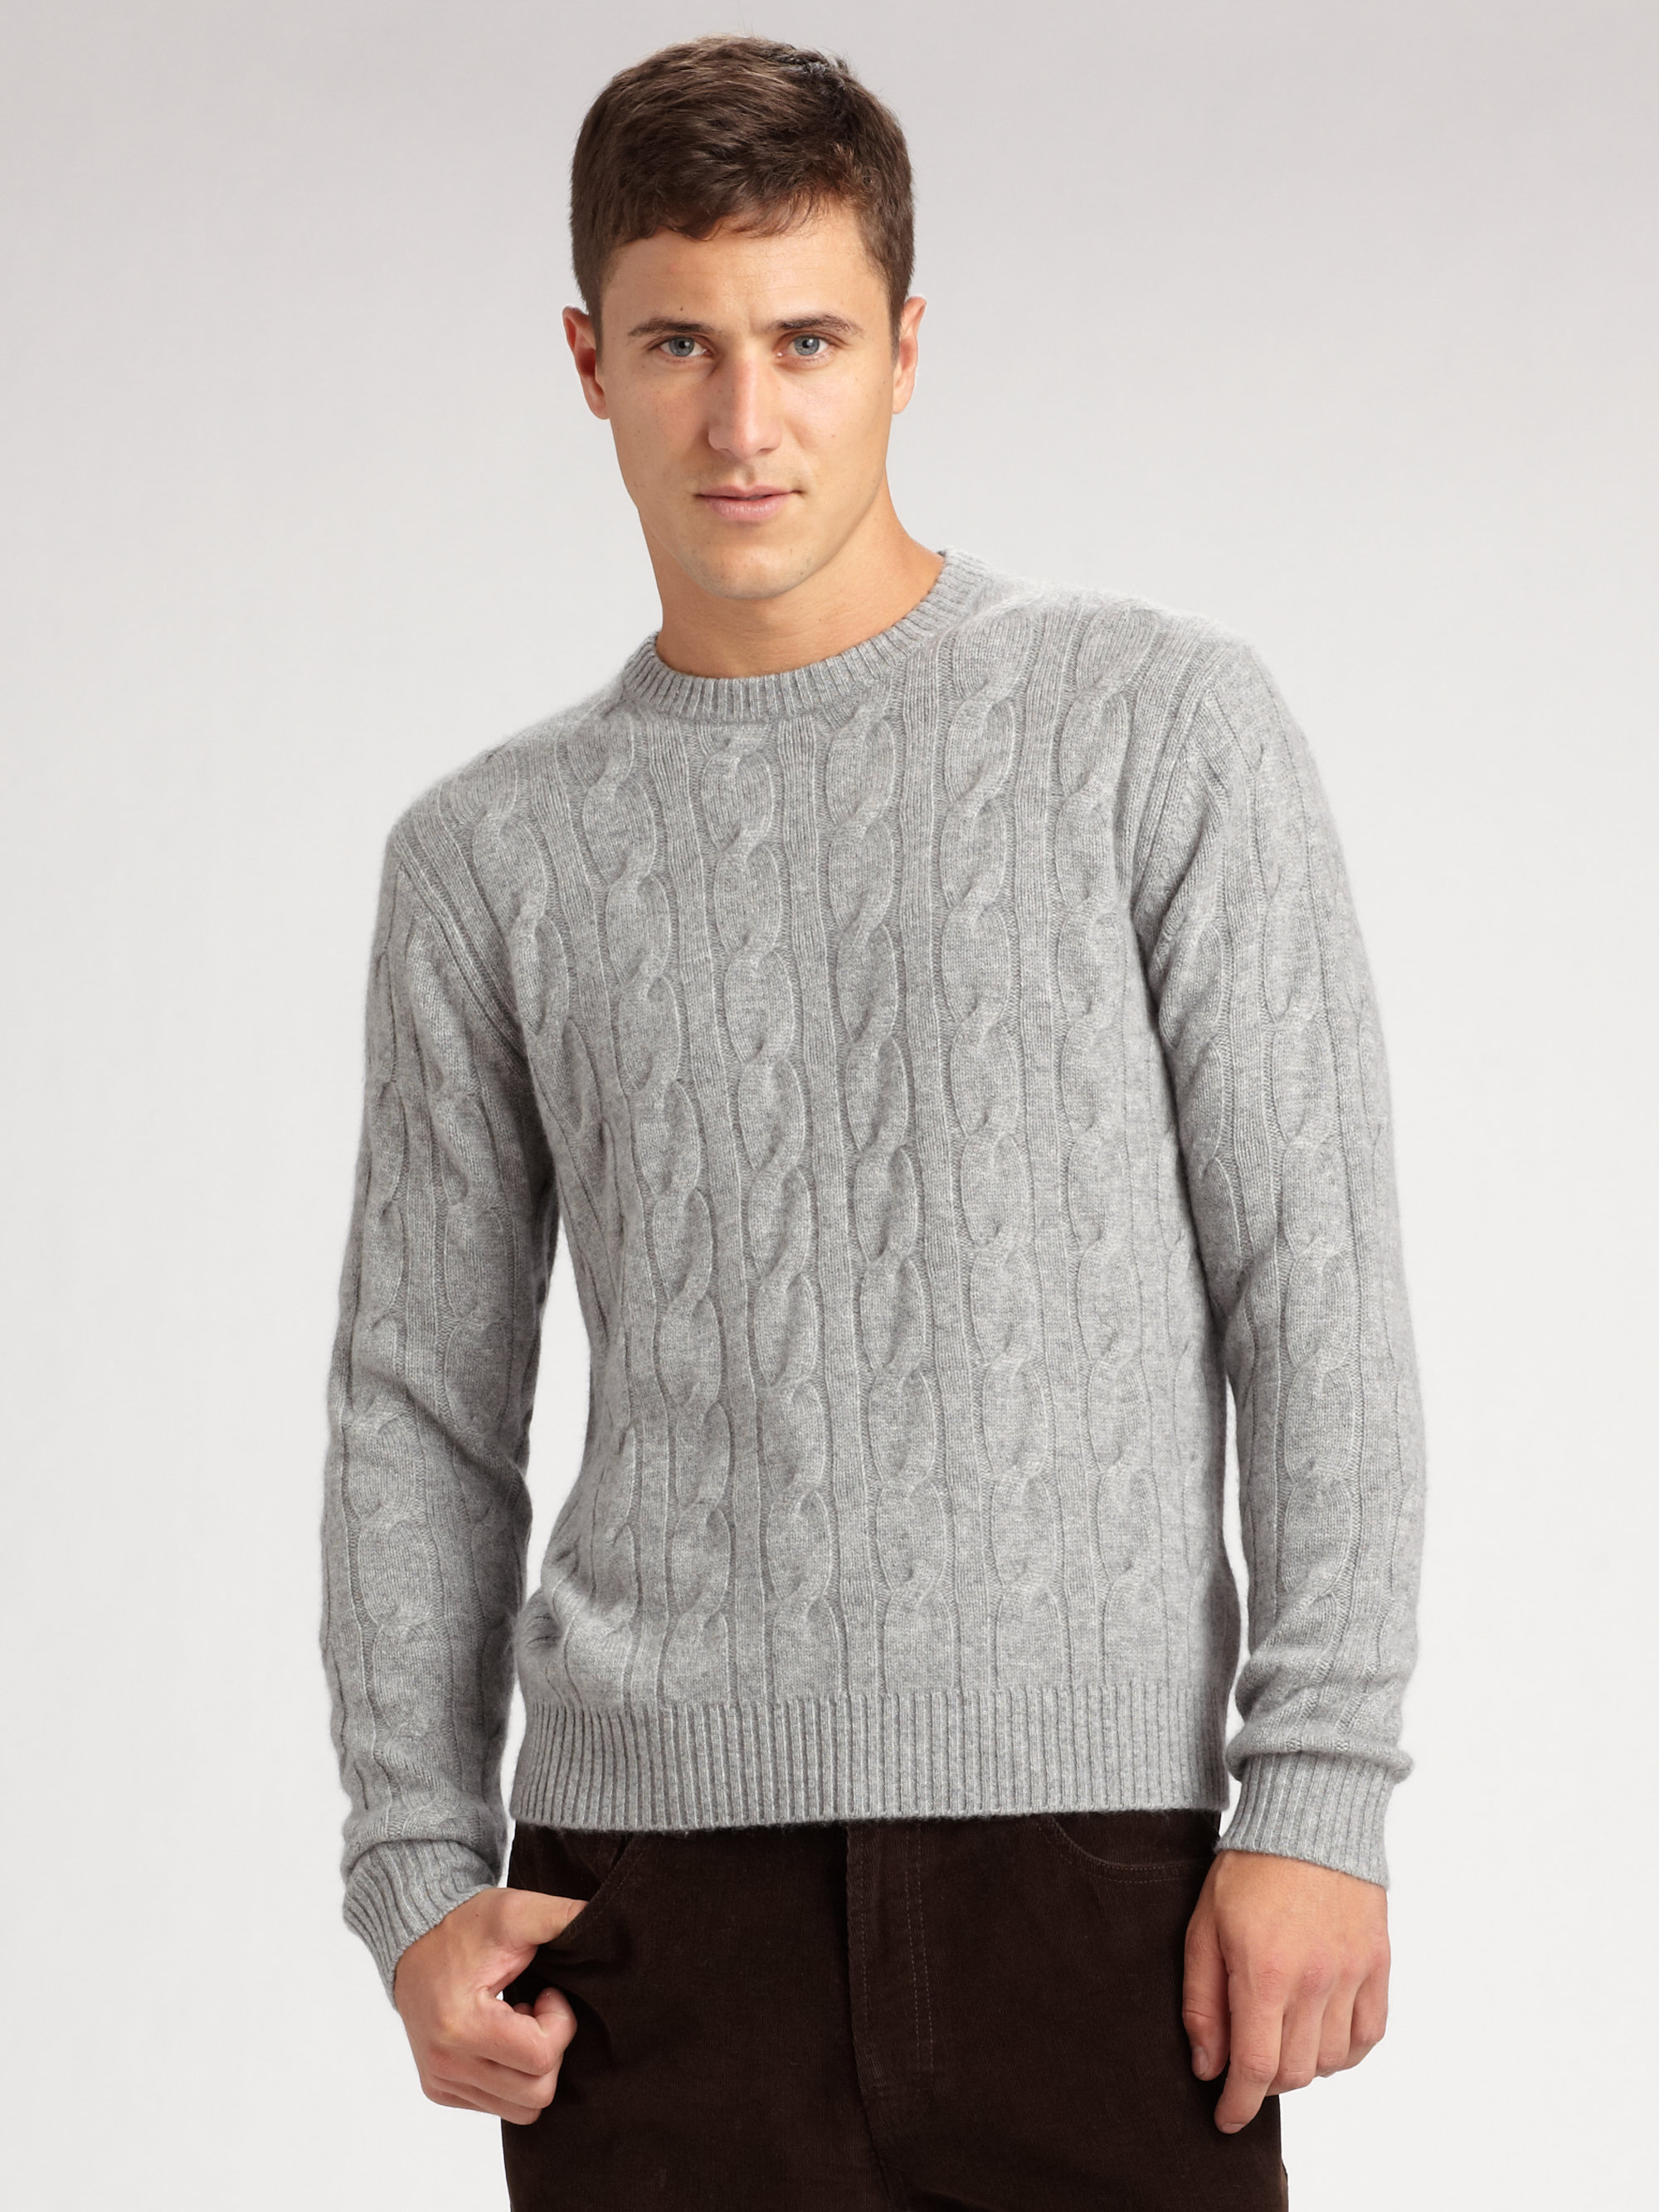 Lyst - Saks fifth avenue Cabled Cashmere Sweater in Gray for Men